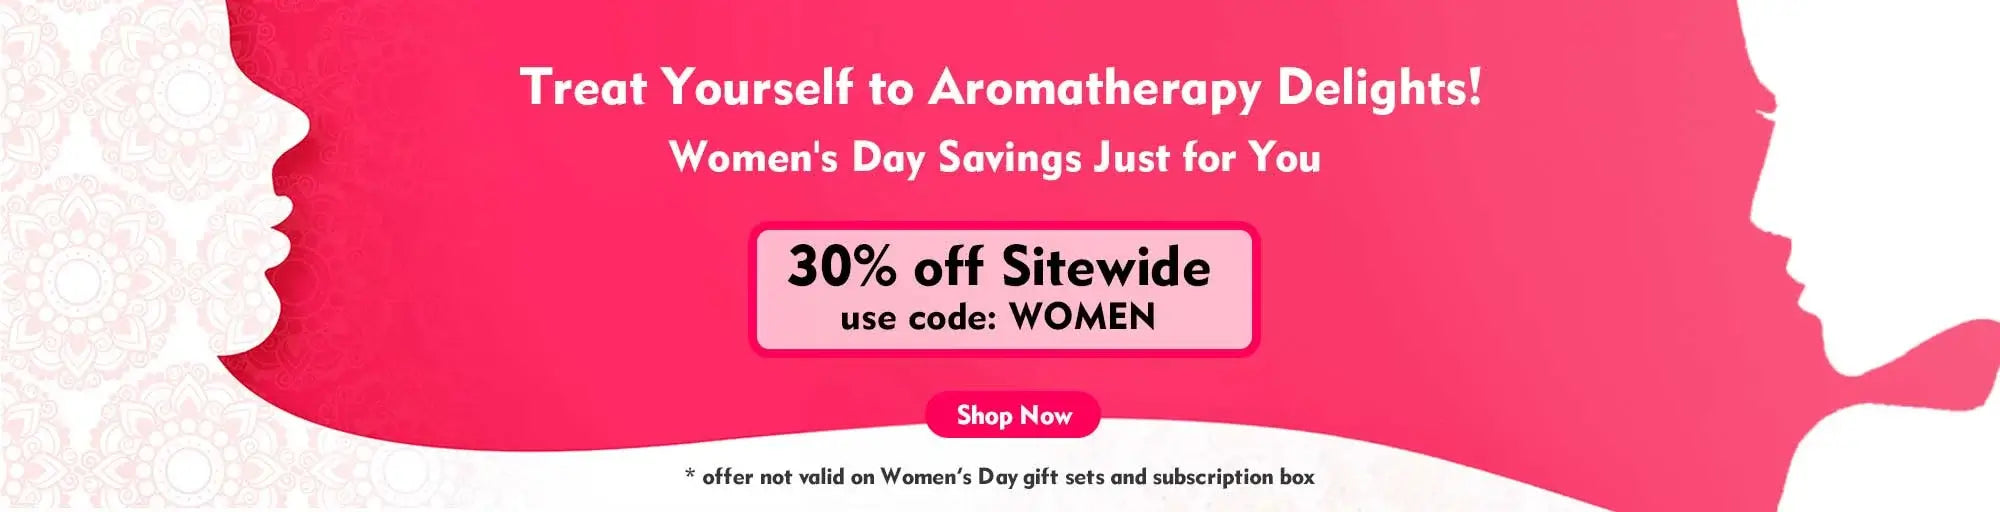 Get 30% off Sitewide on Account of Women’s Day